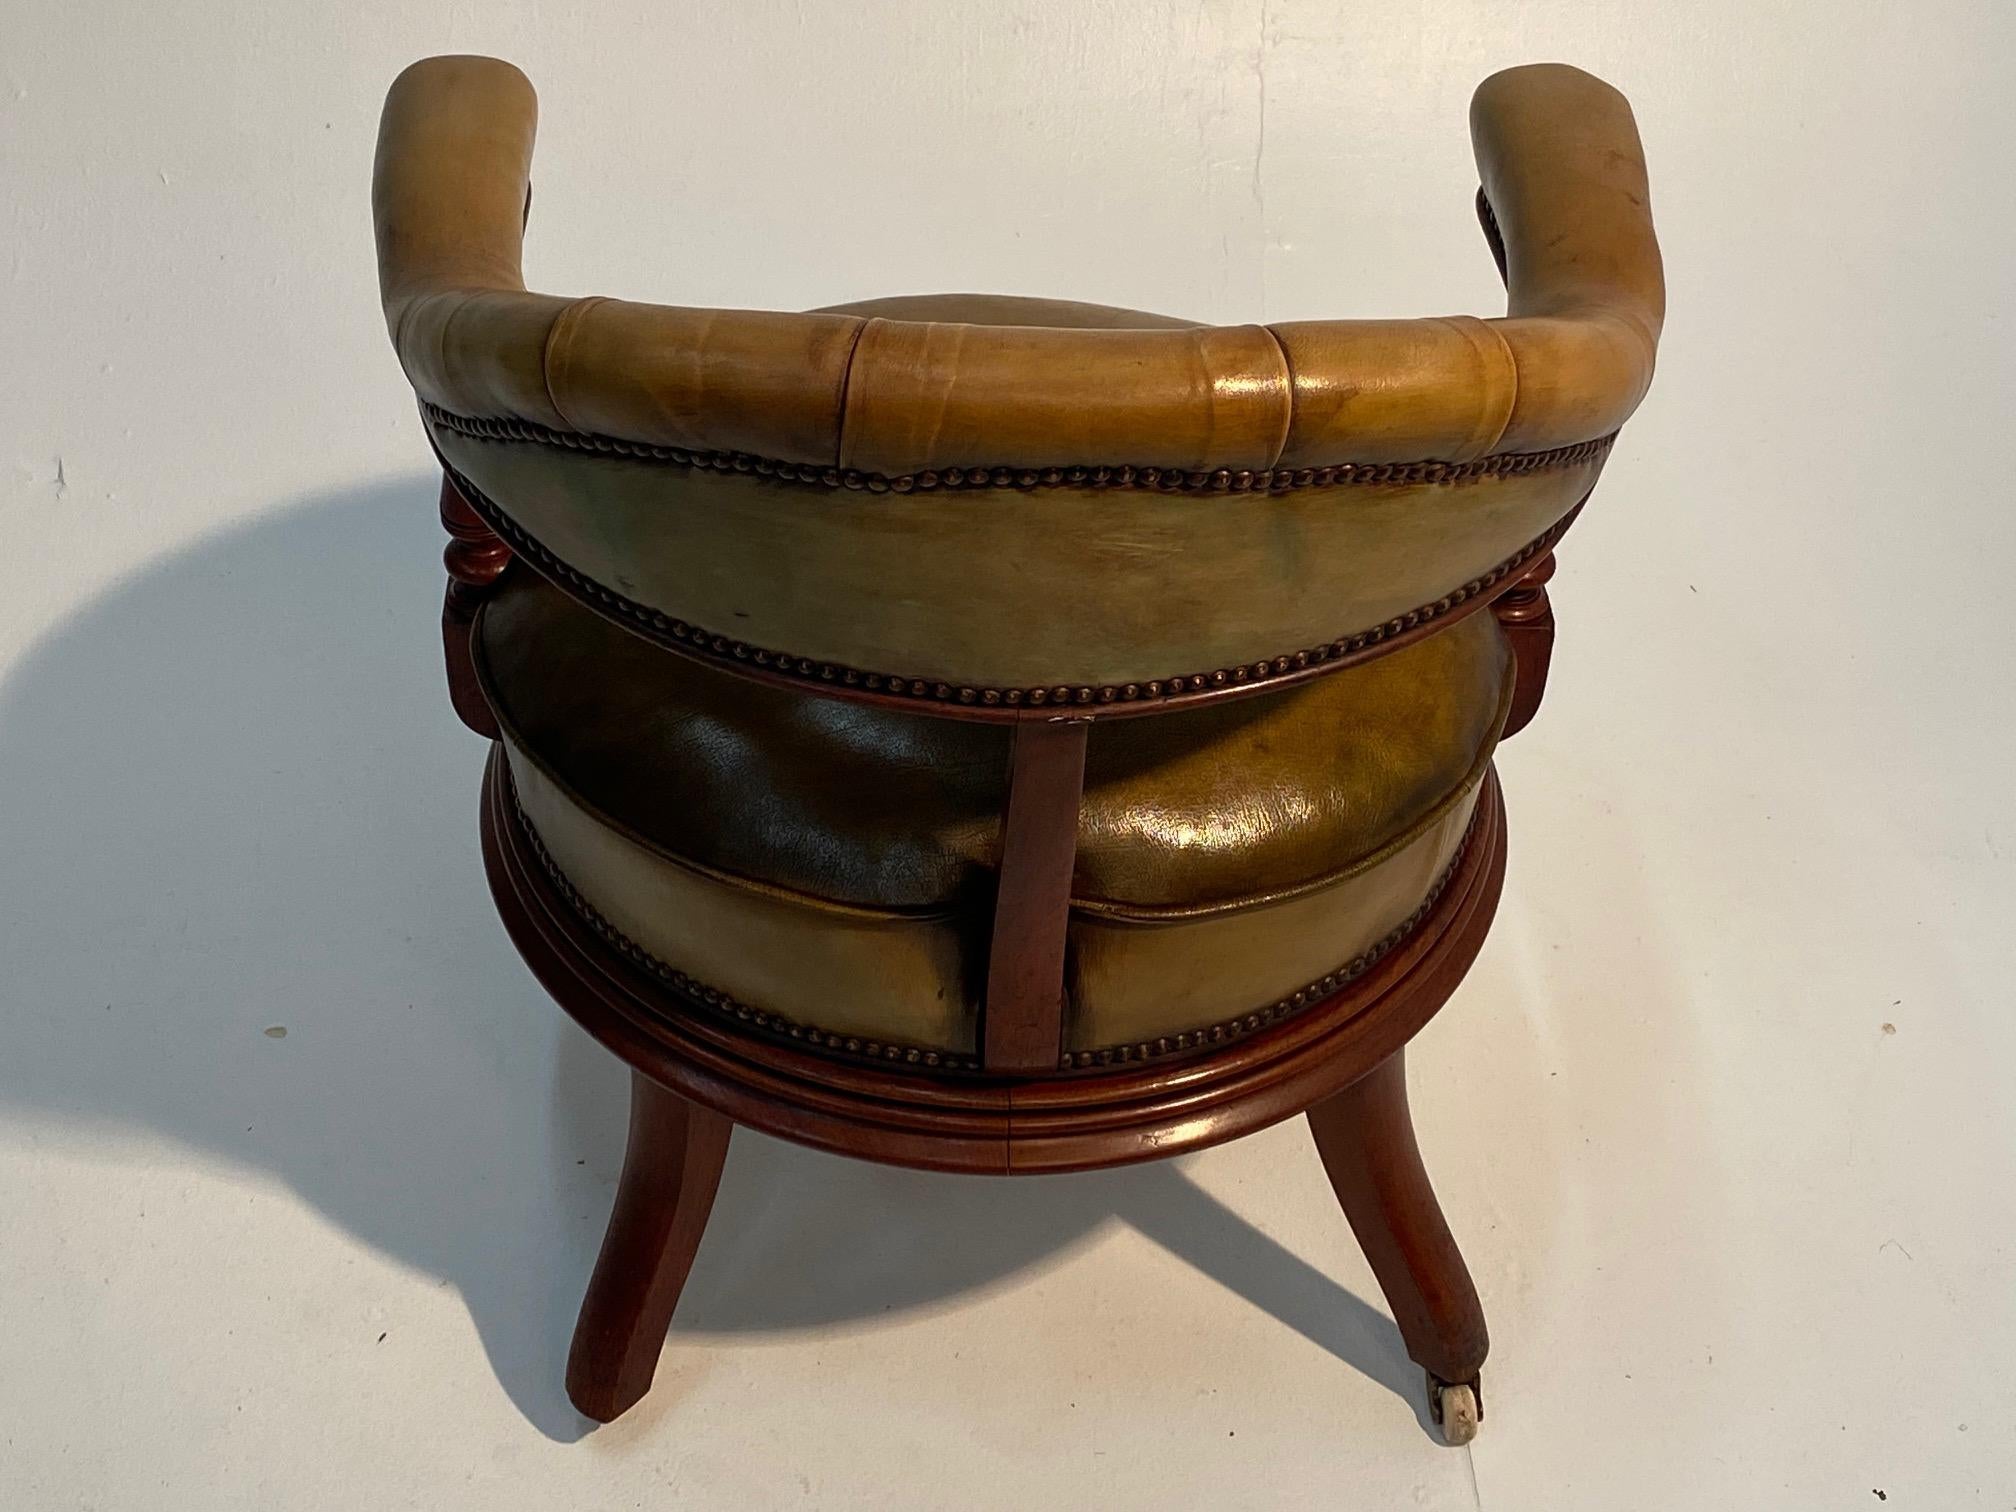 Edwardian Power Broker Rotating English Leather Library or Desk Chair